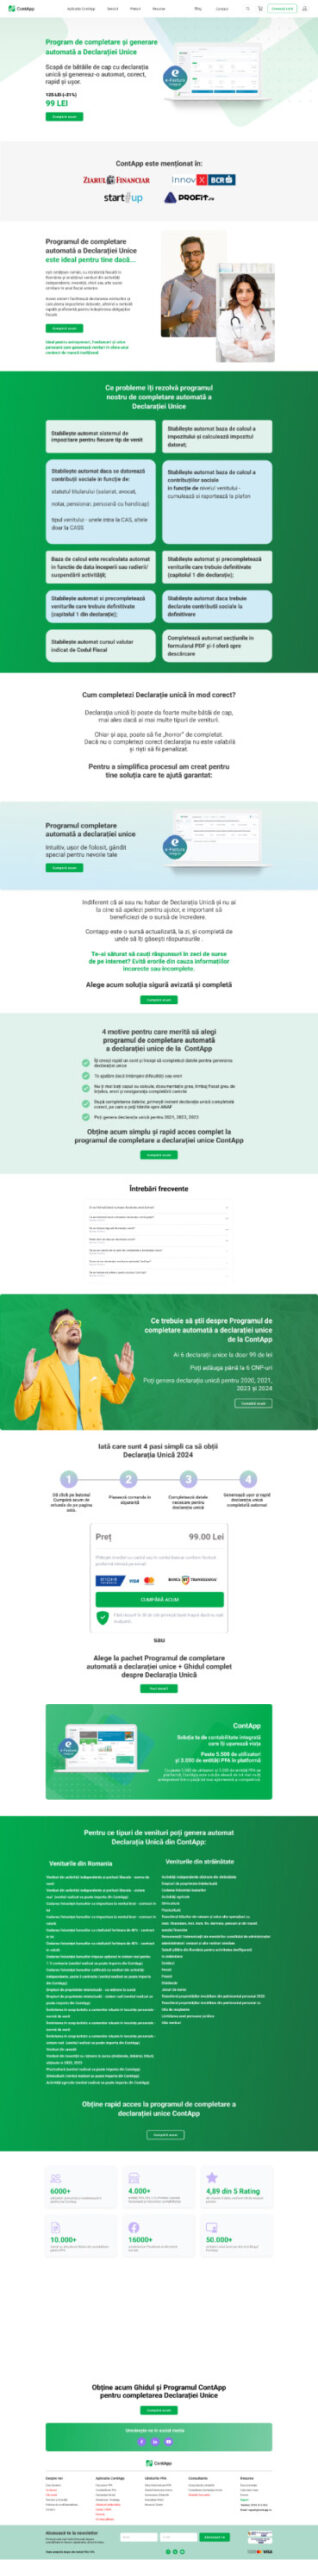 landing-page-contapp-3